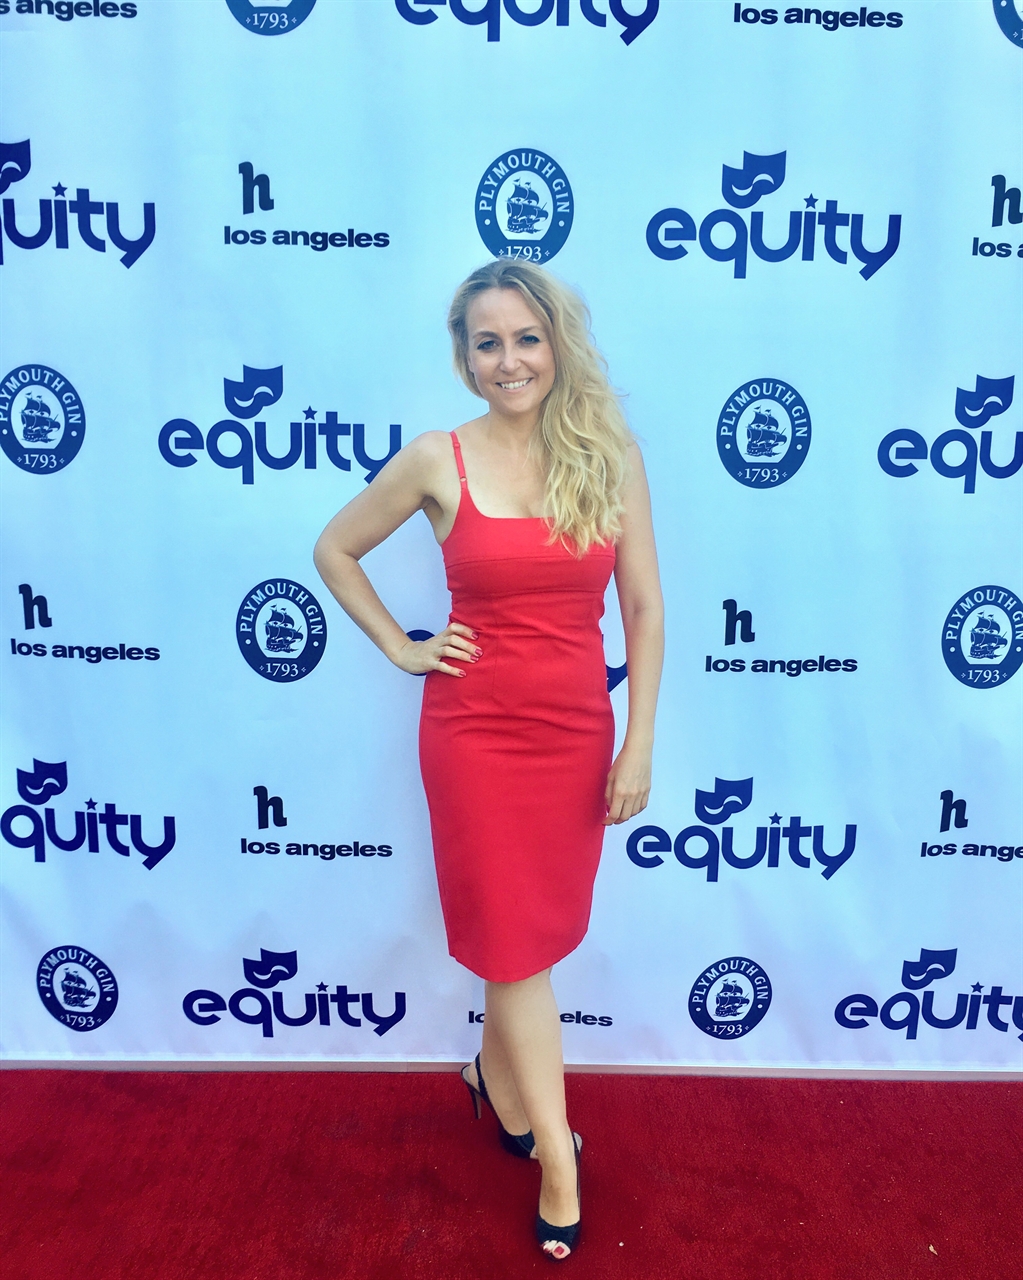 Janine on the red carpet attends the annual Equity UK garden party.  Held in the Hollywood Hills in Los Angeles